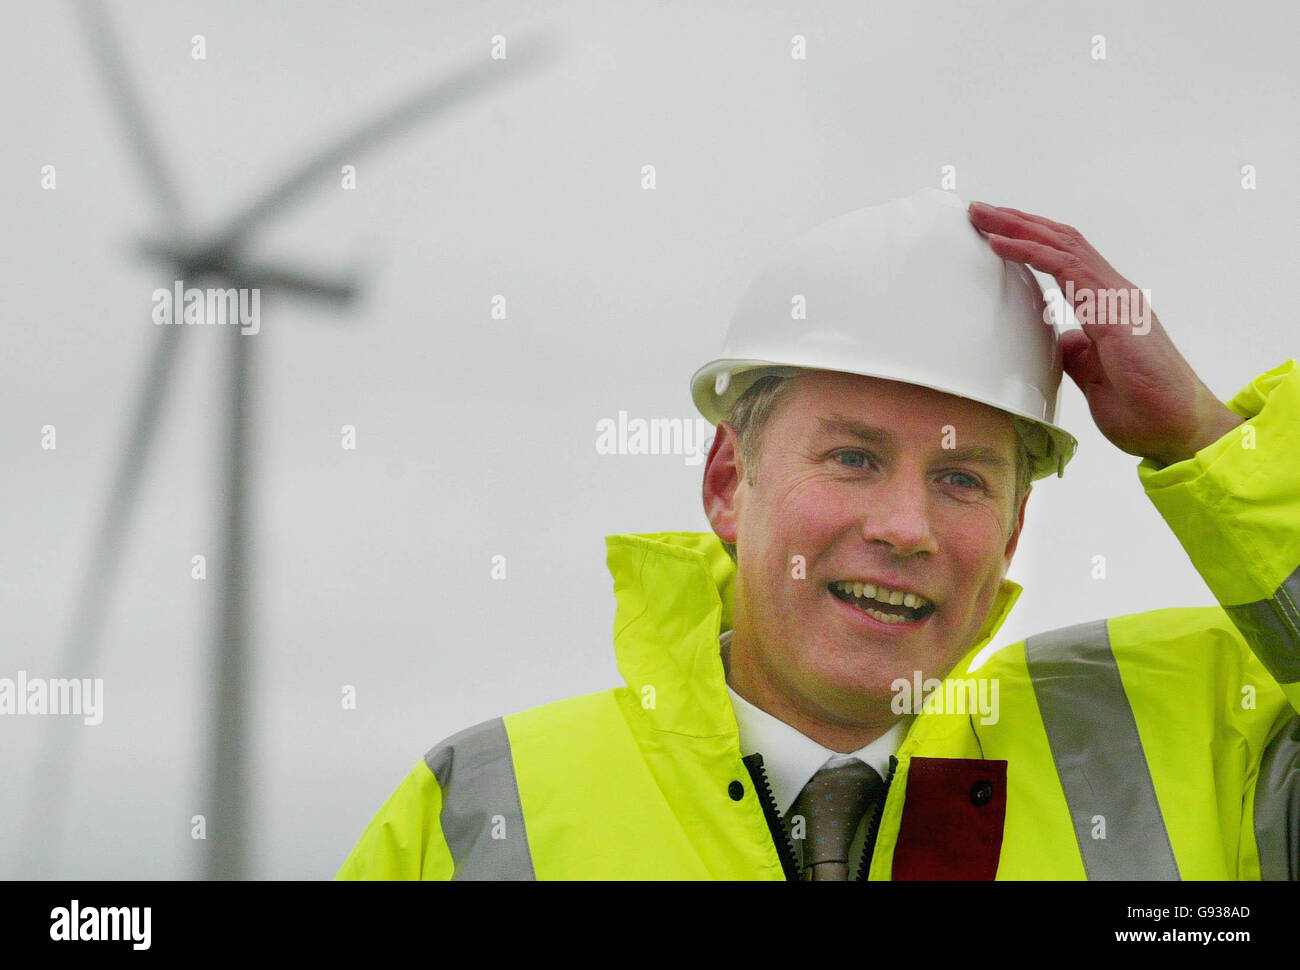 The UK`s largest wind project from Scottish Power is opened at Black Law wind farm South Lanarkshire in Scotland, on the site of an old coal mine, Thursday 12 January 2006, by Deputy First minister Nicol Stephen who holds onto his hat. Stephen's claimed that the project will help Scotland become a 'powerhouse' of renewable energy. See PA Story SCOTLAND Windfarm. PRESS ASSOCIATION Photo. Photo credit should read: David Cheskin/PA Stock Photo